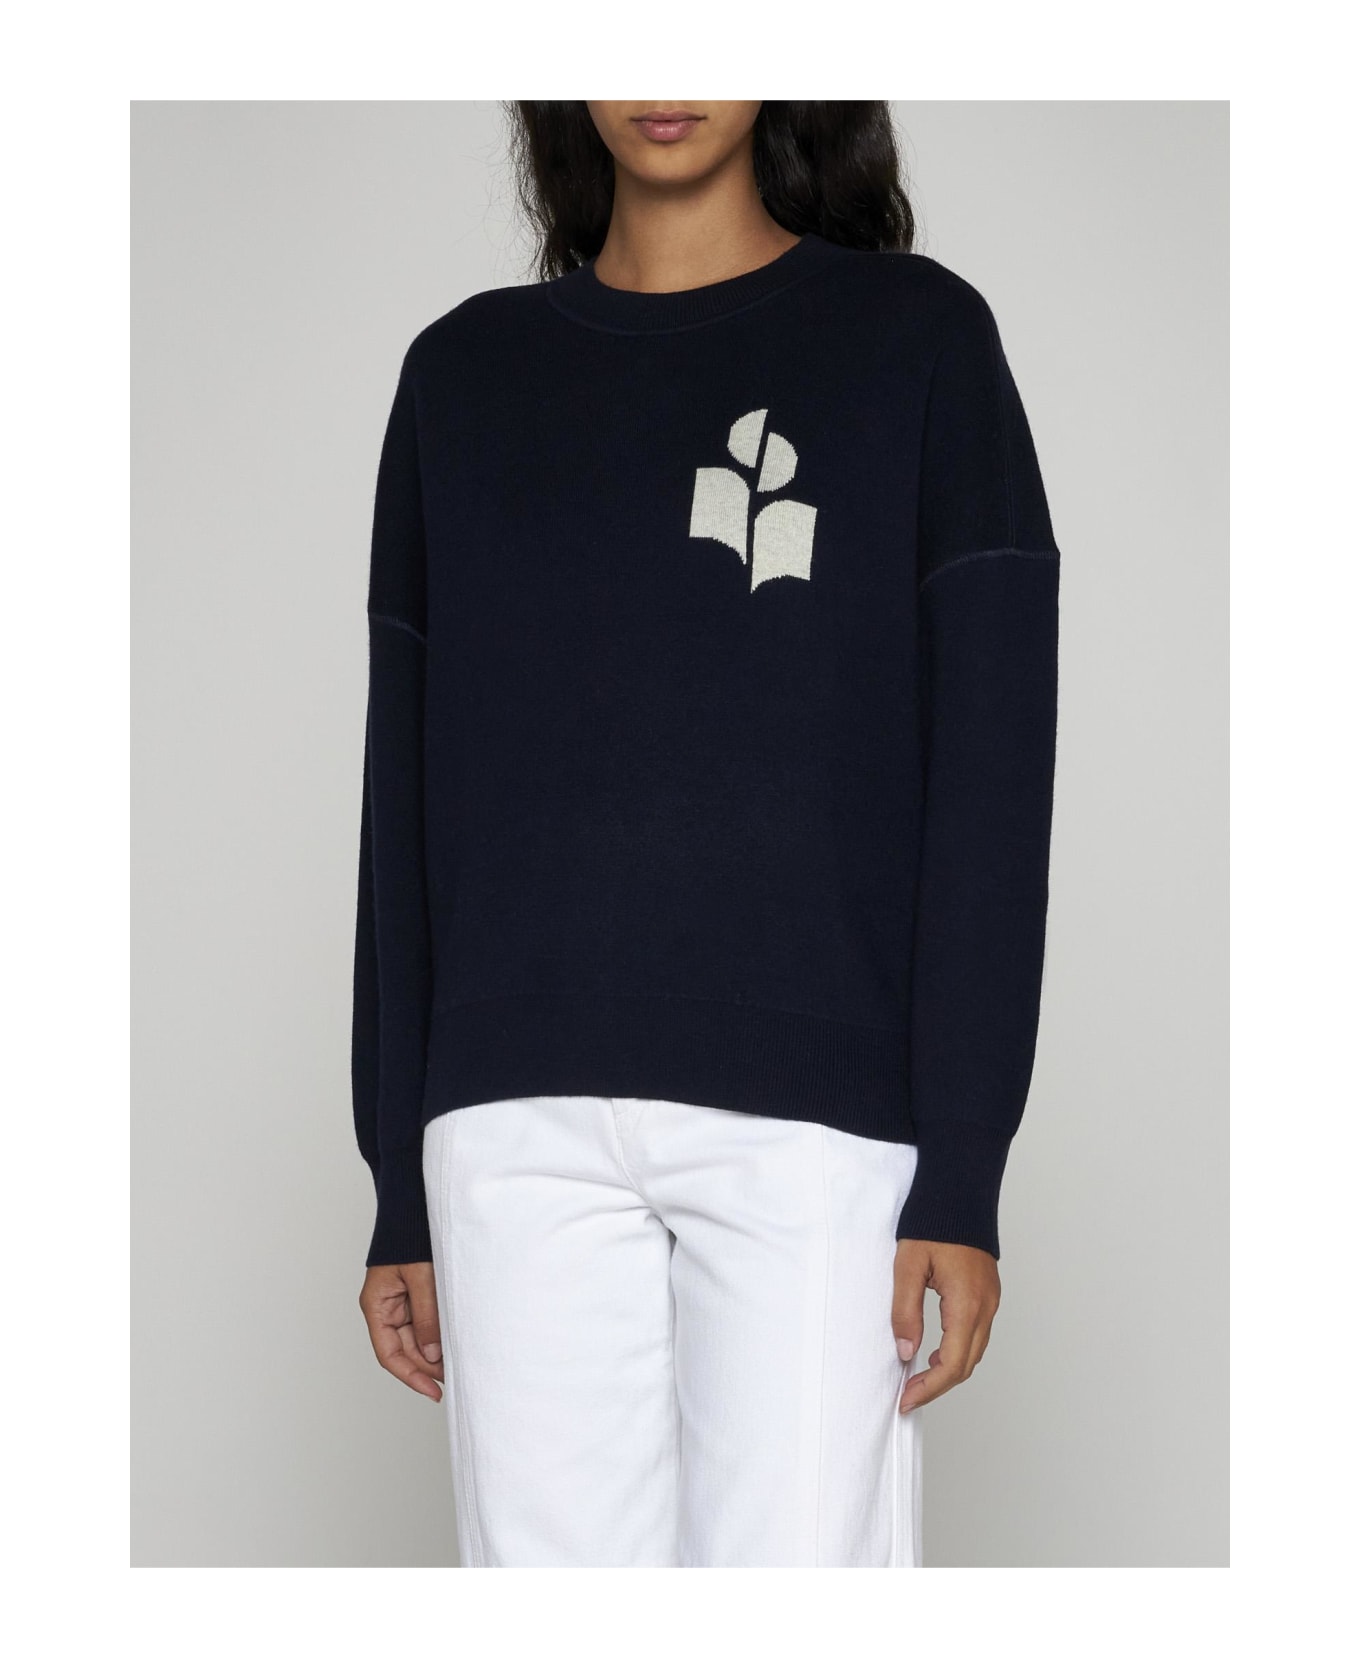 Marant Étoile Atlee Cotton And Wool Blend Sweater - Midnight